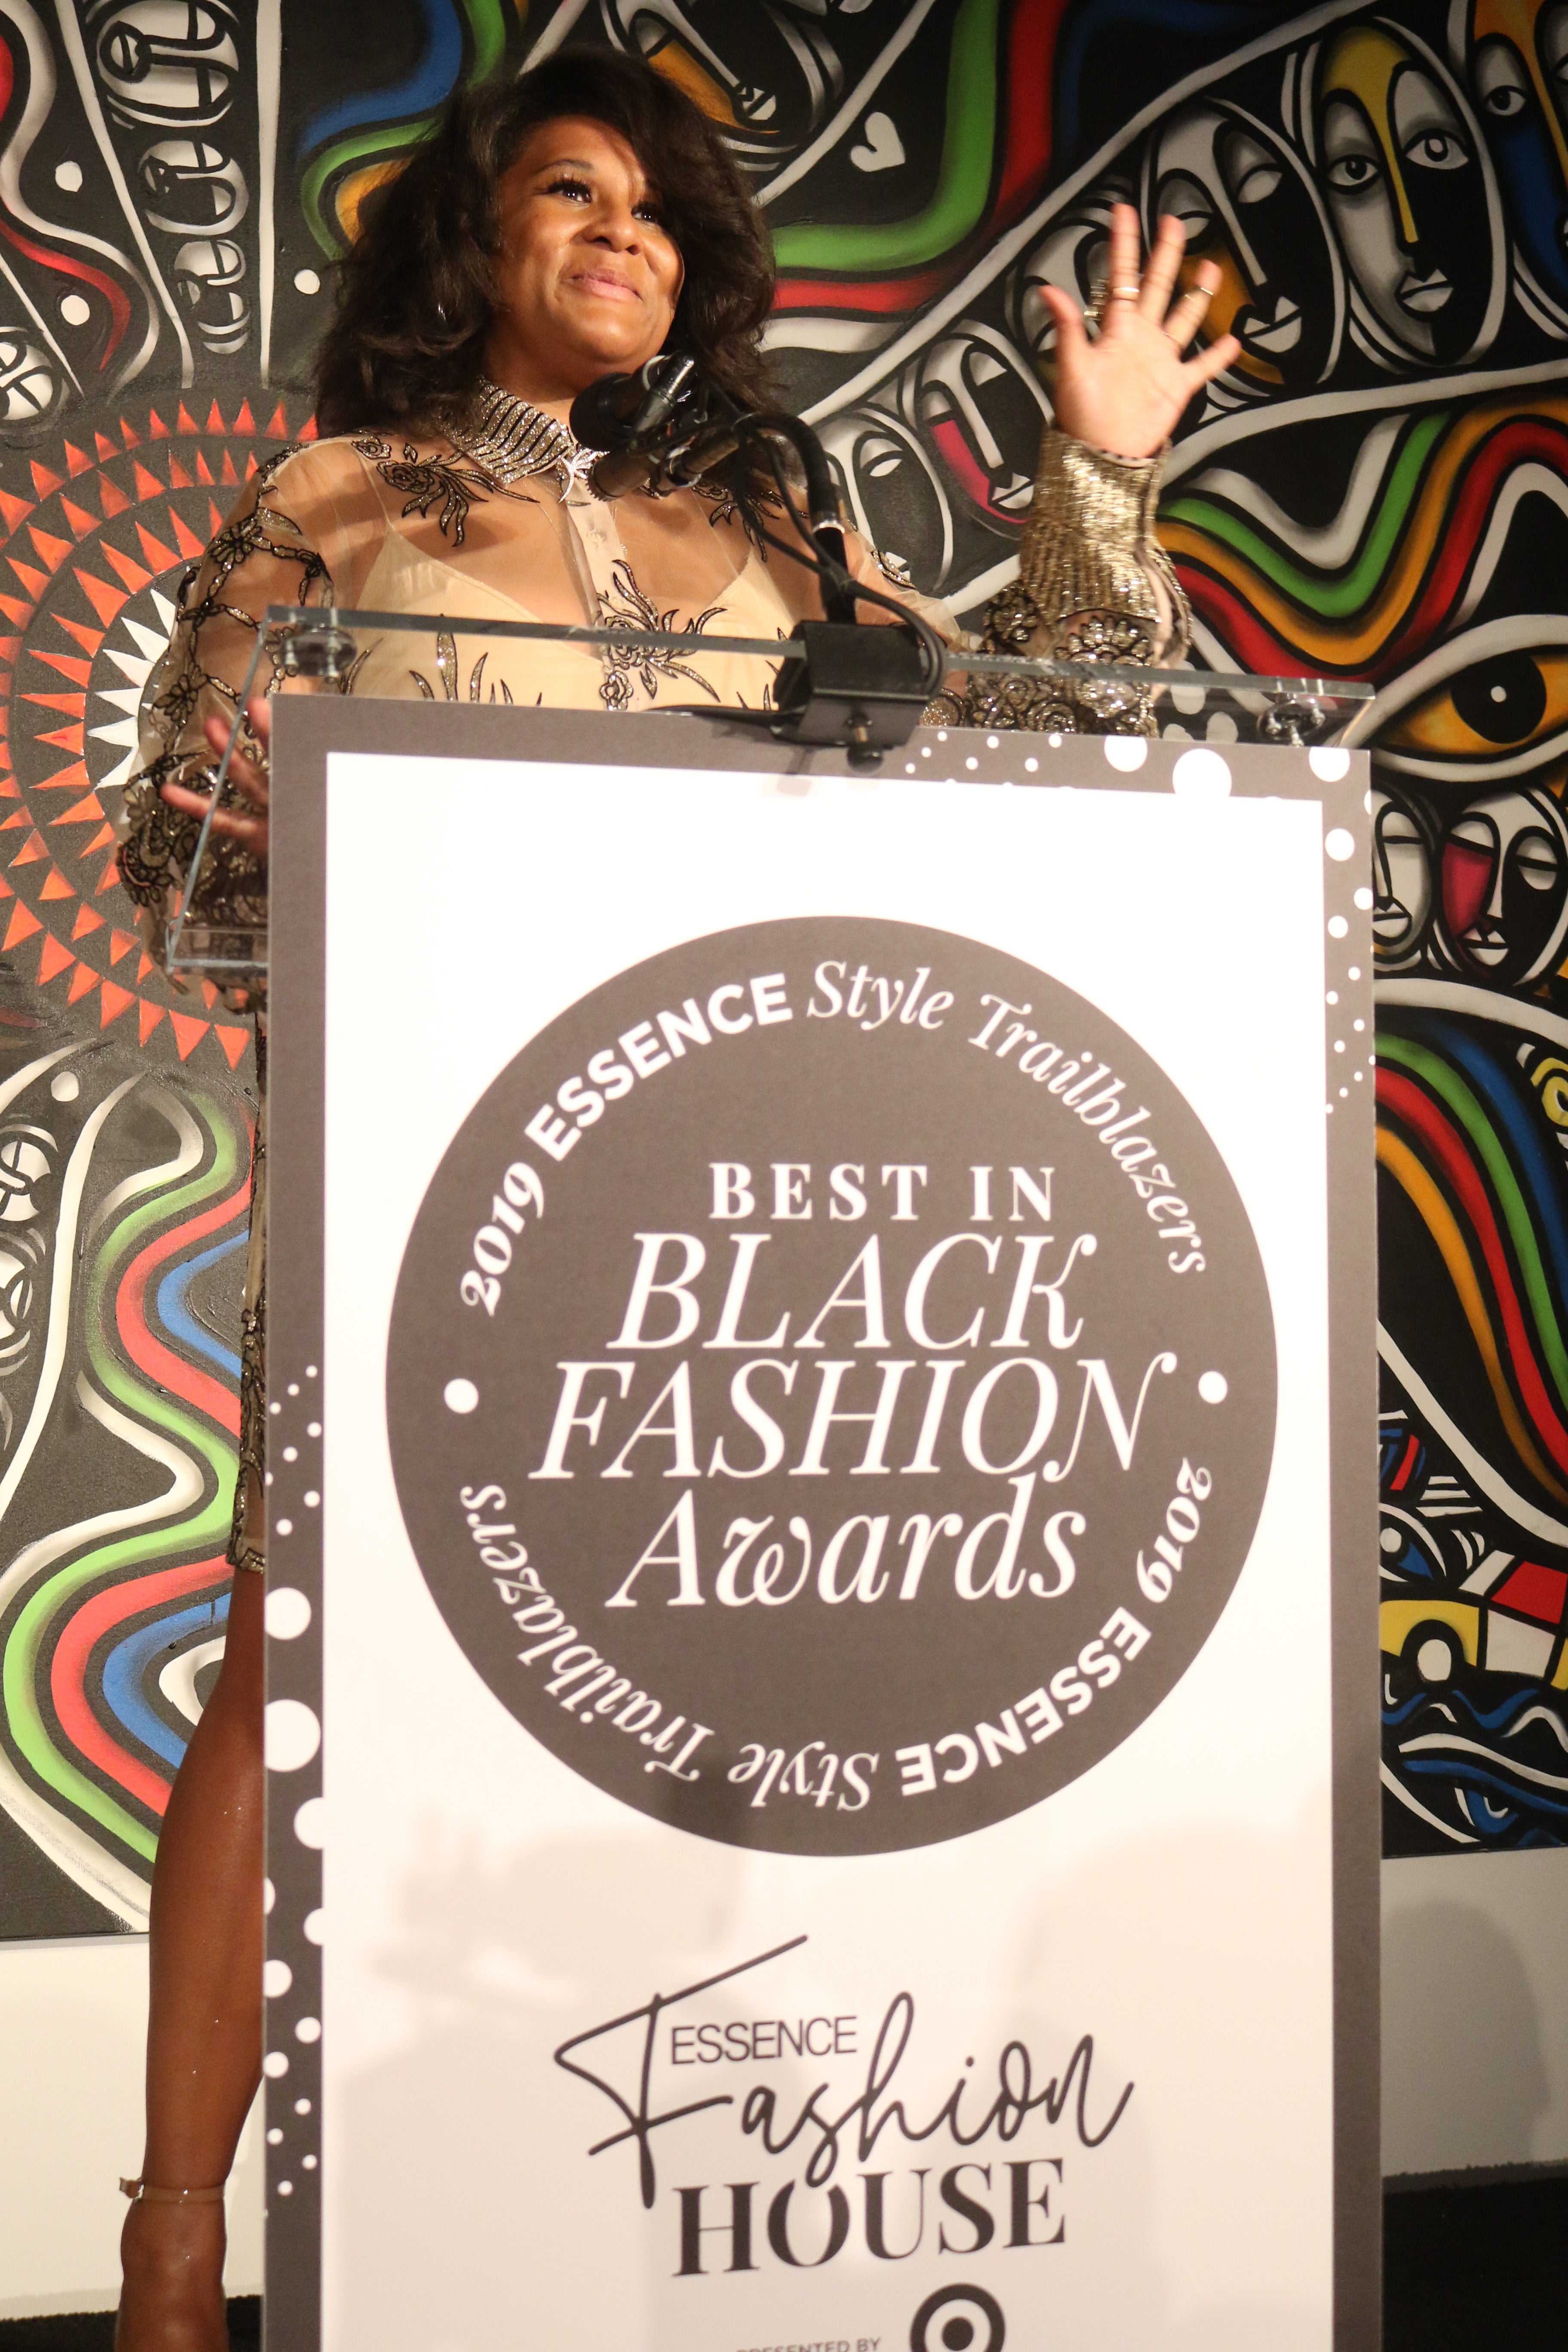 The ESSENCE Fashion House Was A Twirl: Here's What You Missed